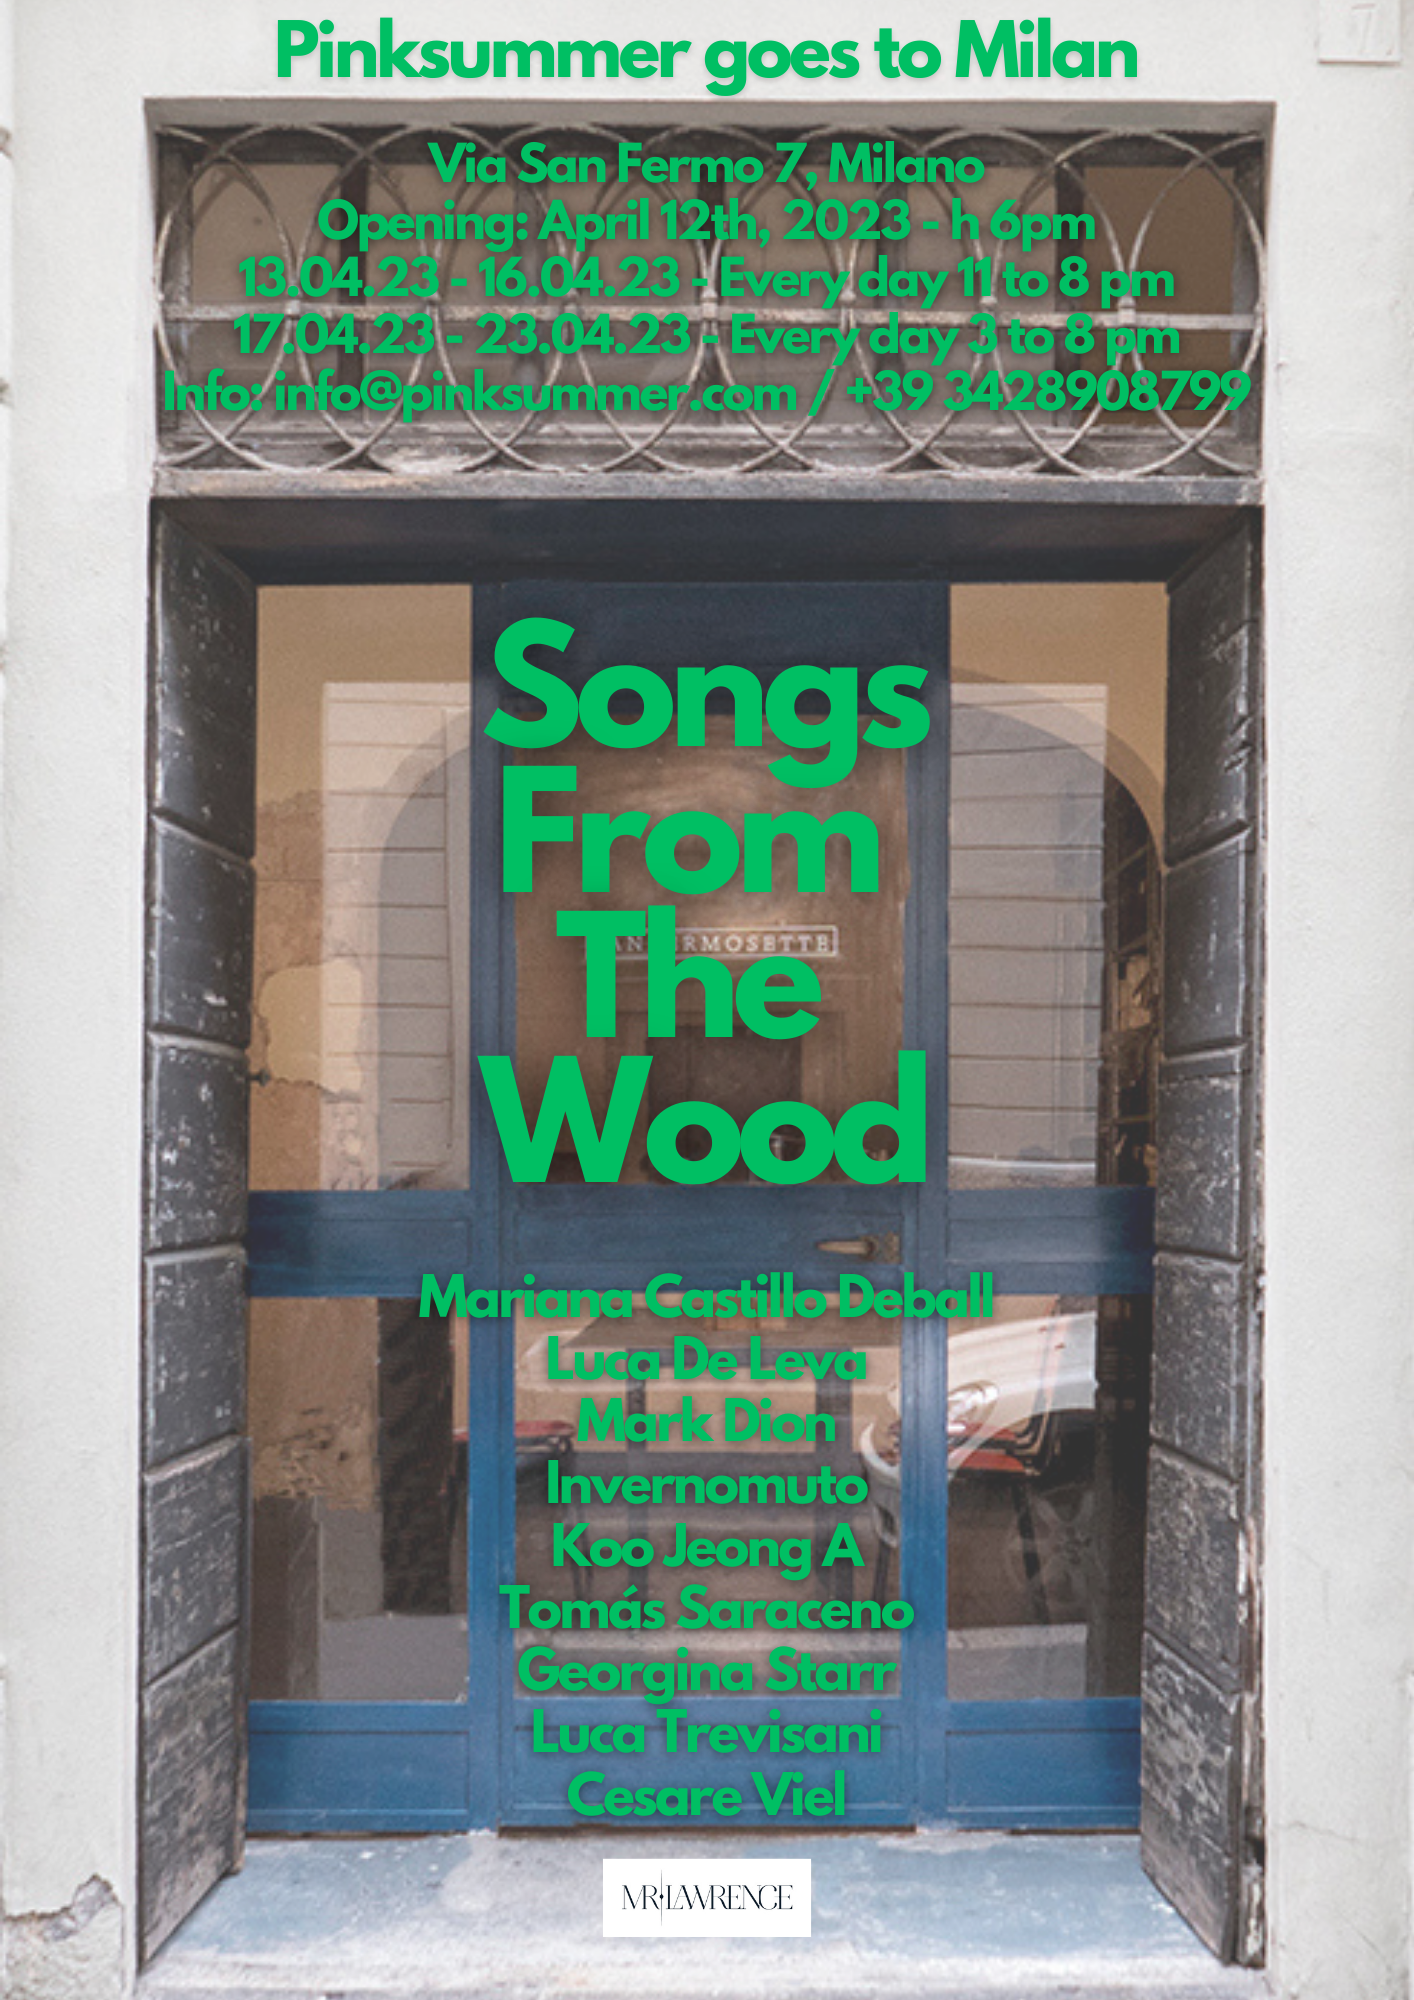 Pinksummer goes to Milan - Songs from the Wood